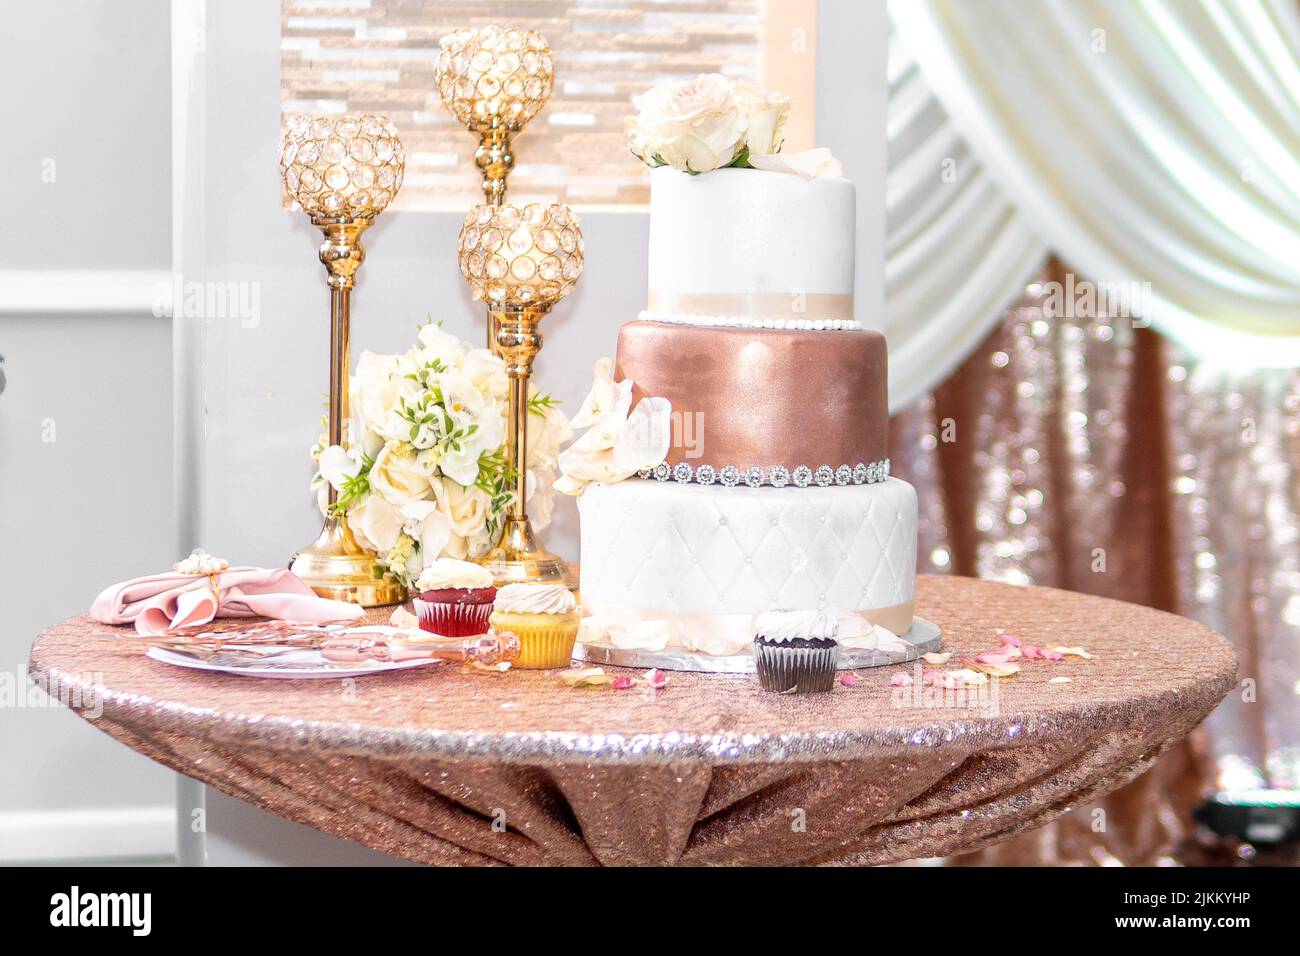 A beautiful wedding reception with pink wedding cake, candlesticks and flowers on the table Stock Photo